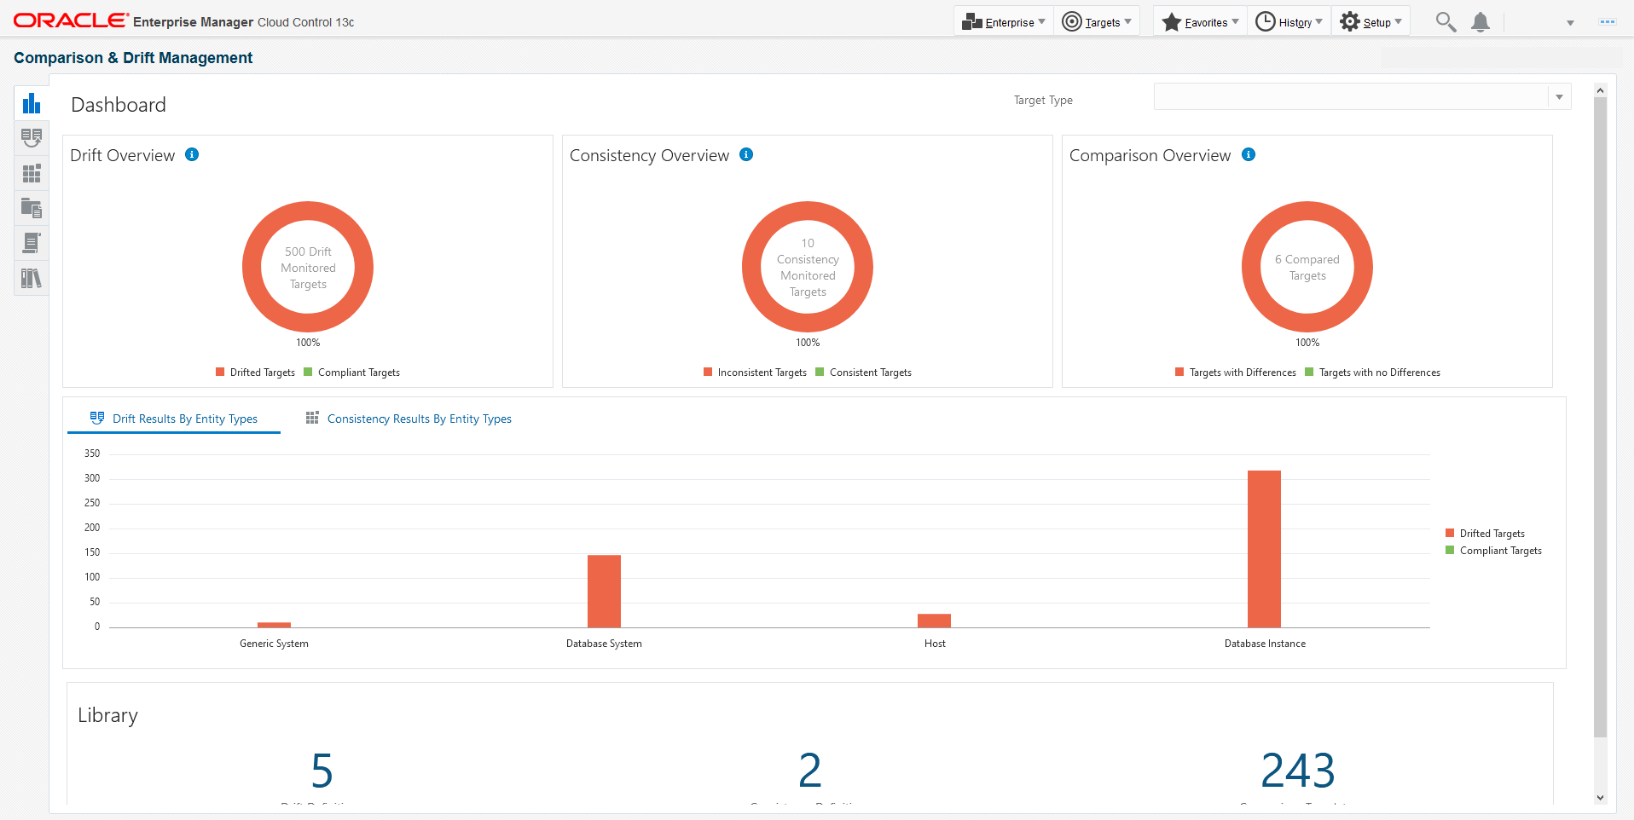 This image shows the new layout for the Comparison and Drift Management dashboard.